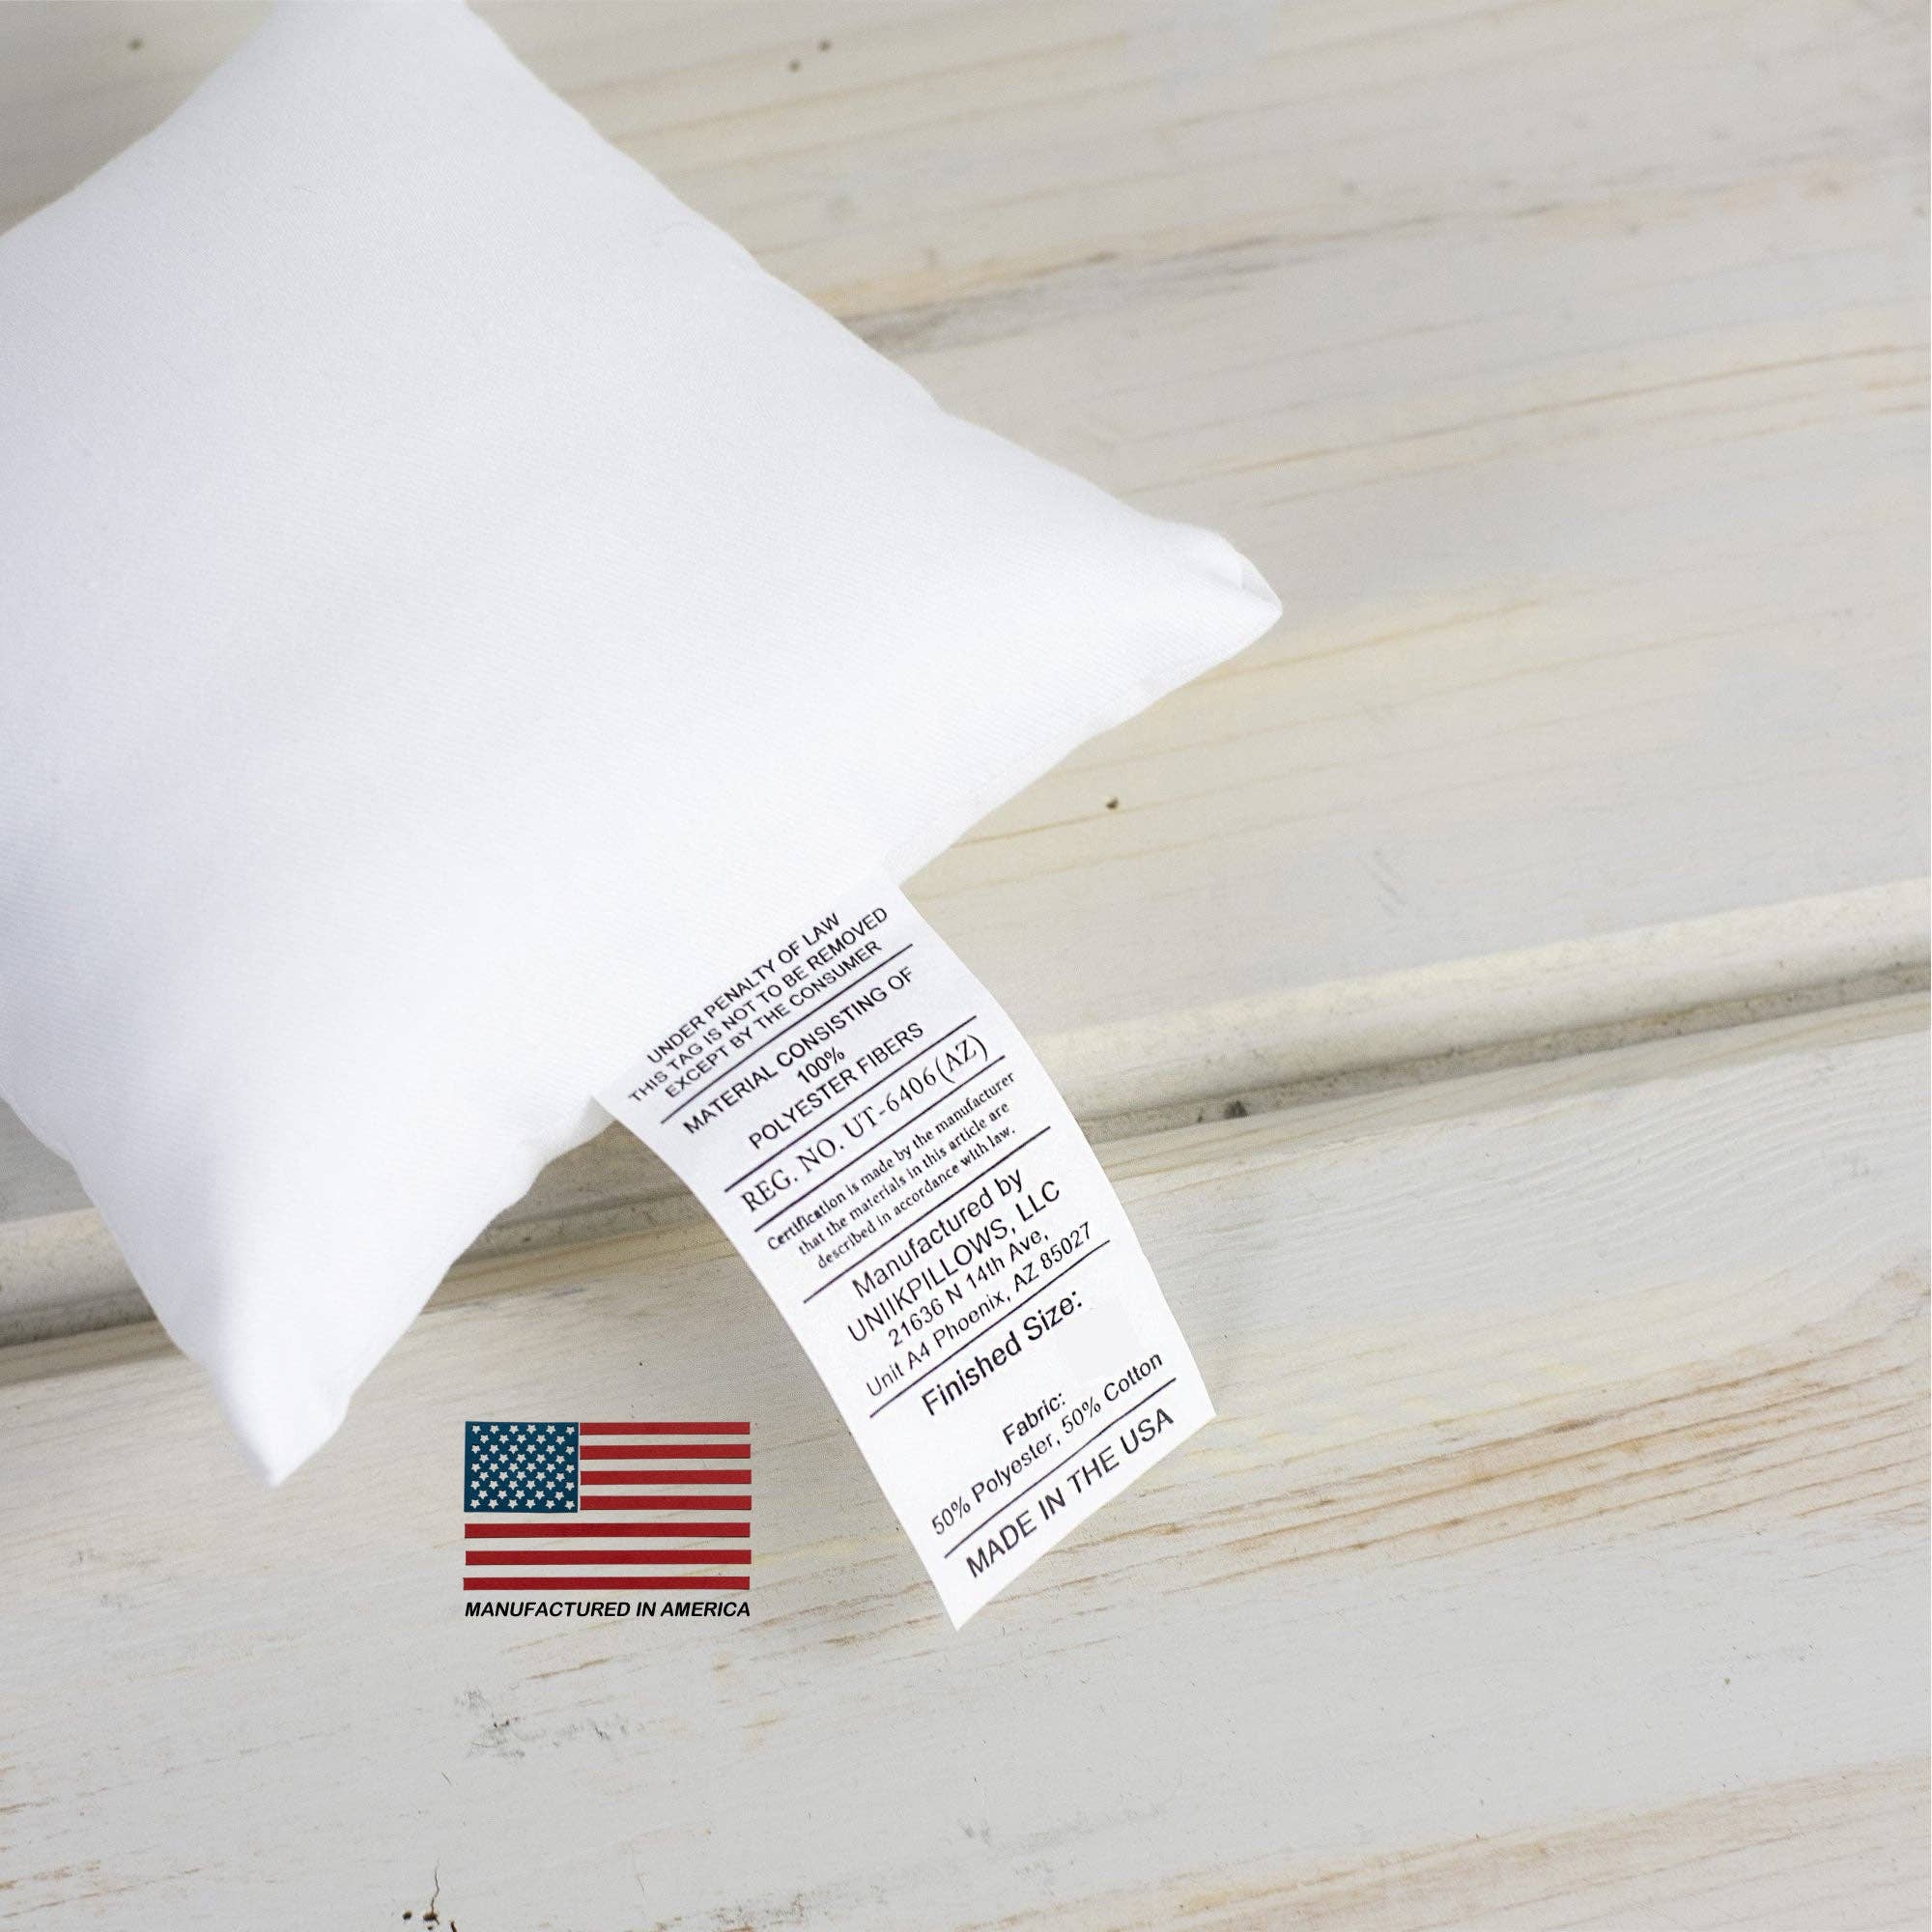 Pal Fabric Square Sham Pillow Insert 14X14 Made in USA (for 14X14 Pillow  Cover) (14x14)